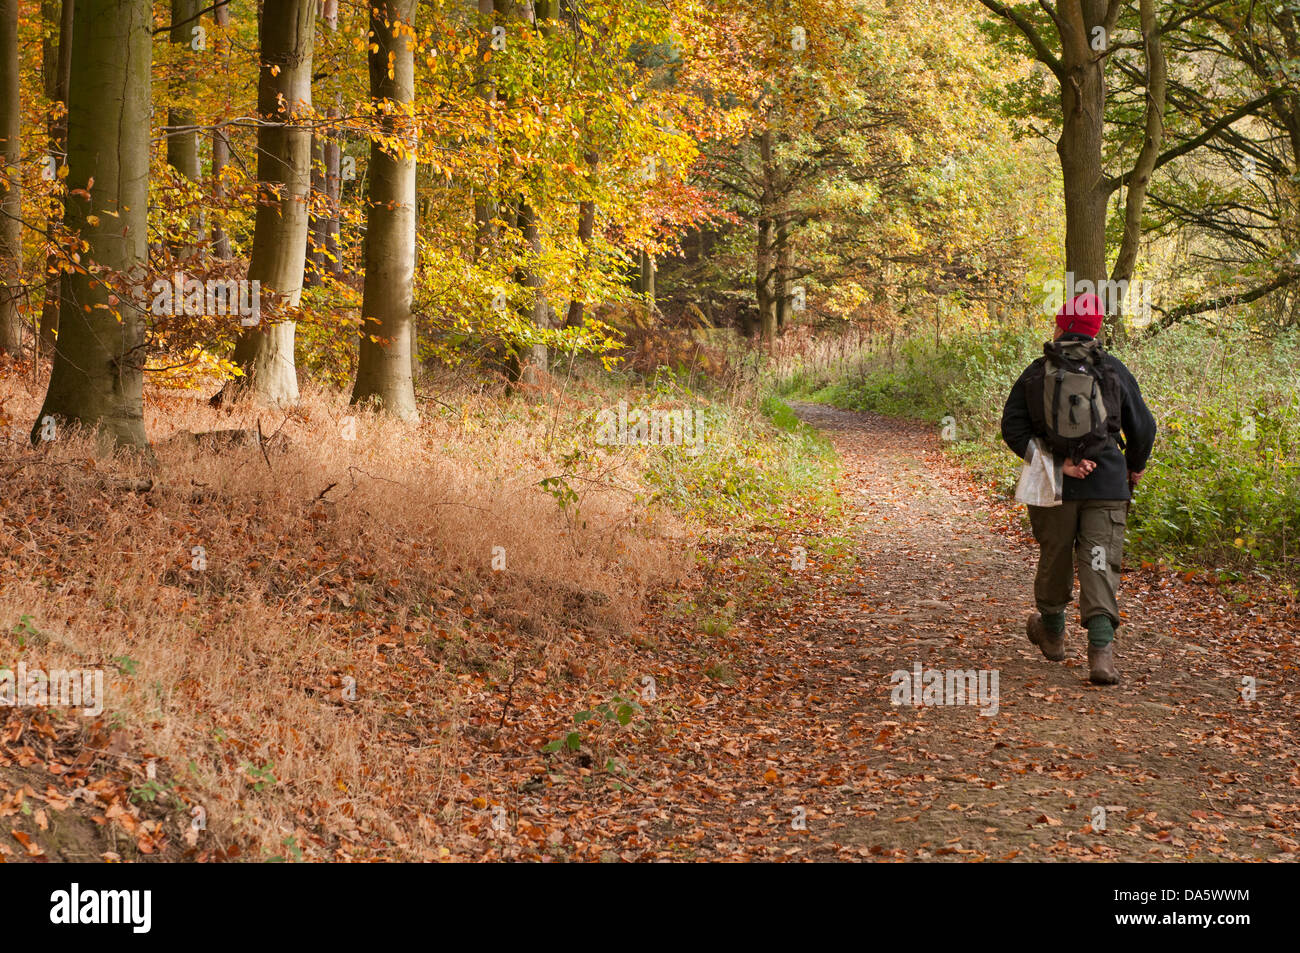 In autumn, man walking on quiet, curving path covered in orange brown fallen leaves in scenic woodland - Lindley Wood, North Yorkshire, England, UK. Stock Photo